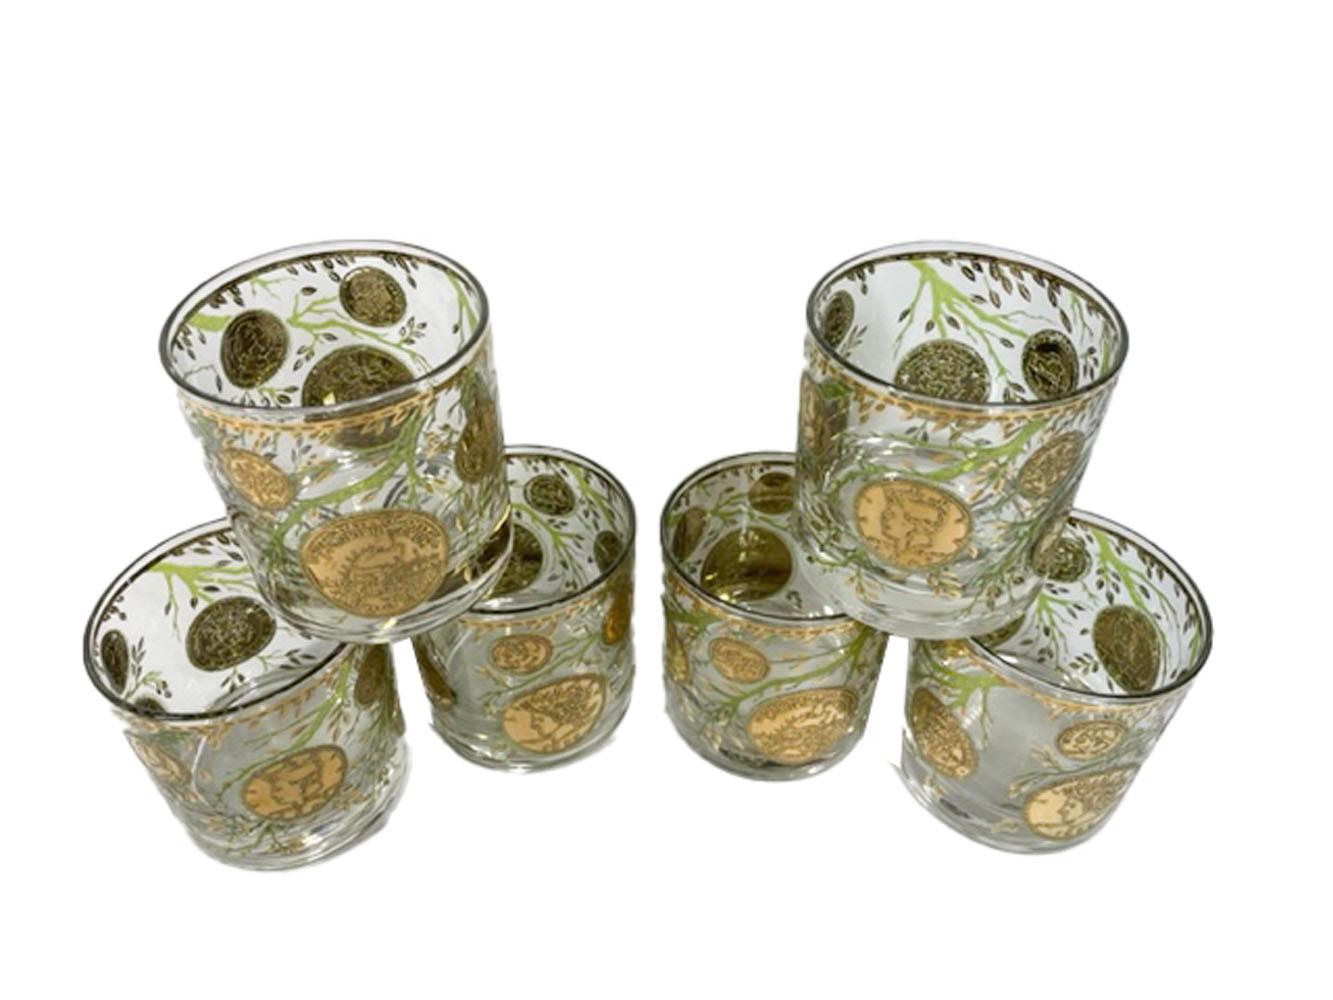 Sic vintage rocks glasses by Culver, LTD in the 'Midas' pattern (gold). Decorated with American coins in 22 karat gold on branches of raised translucent green enamel with gold leaves.